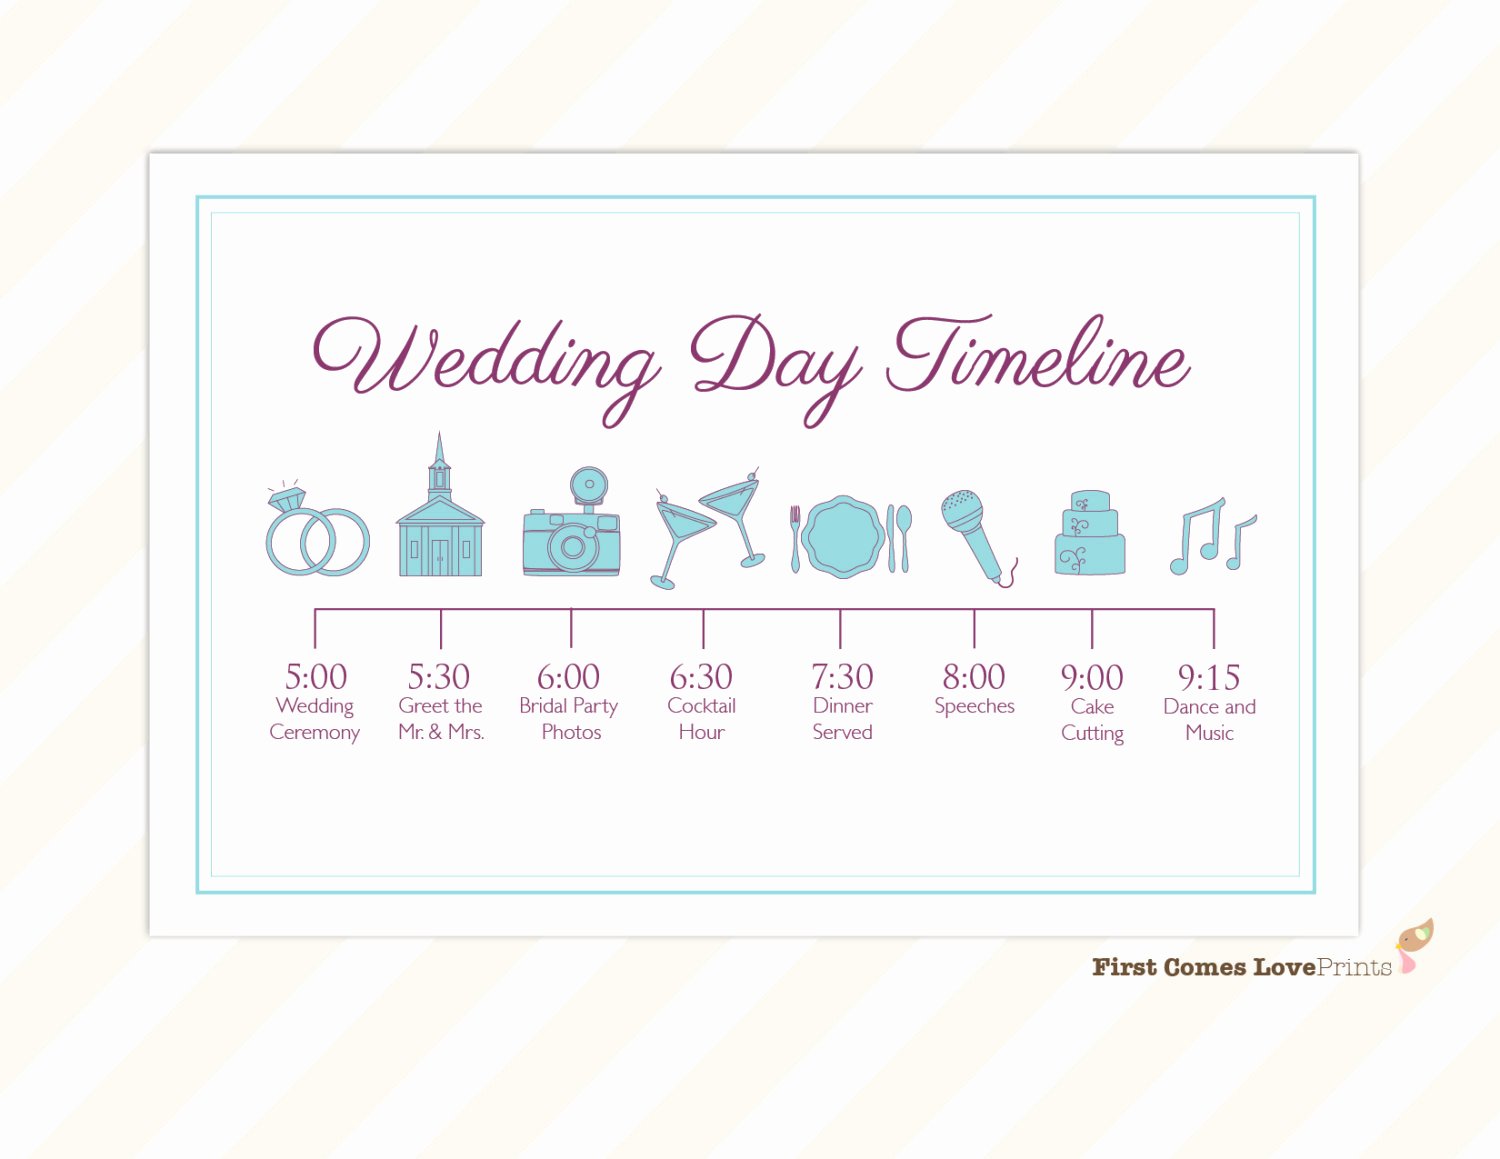 Wedding Day Timeline Card Itinerary for Guests Big Day